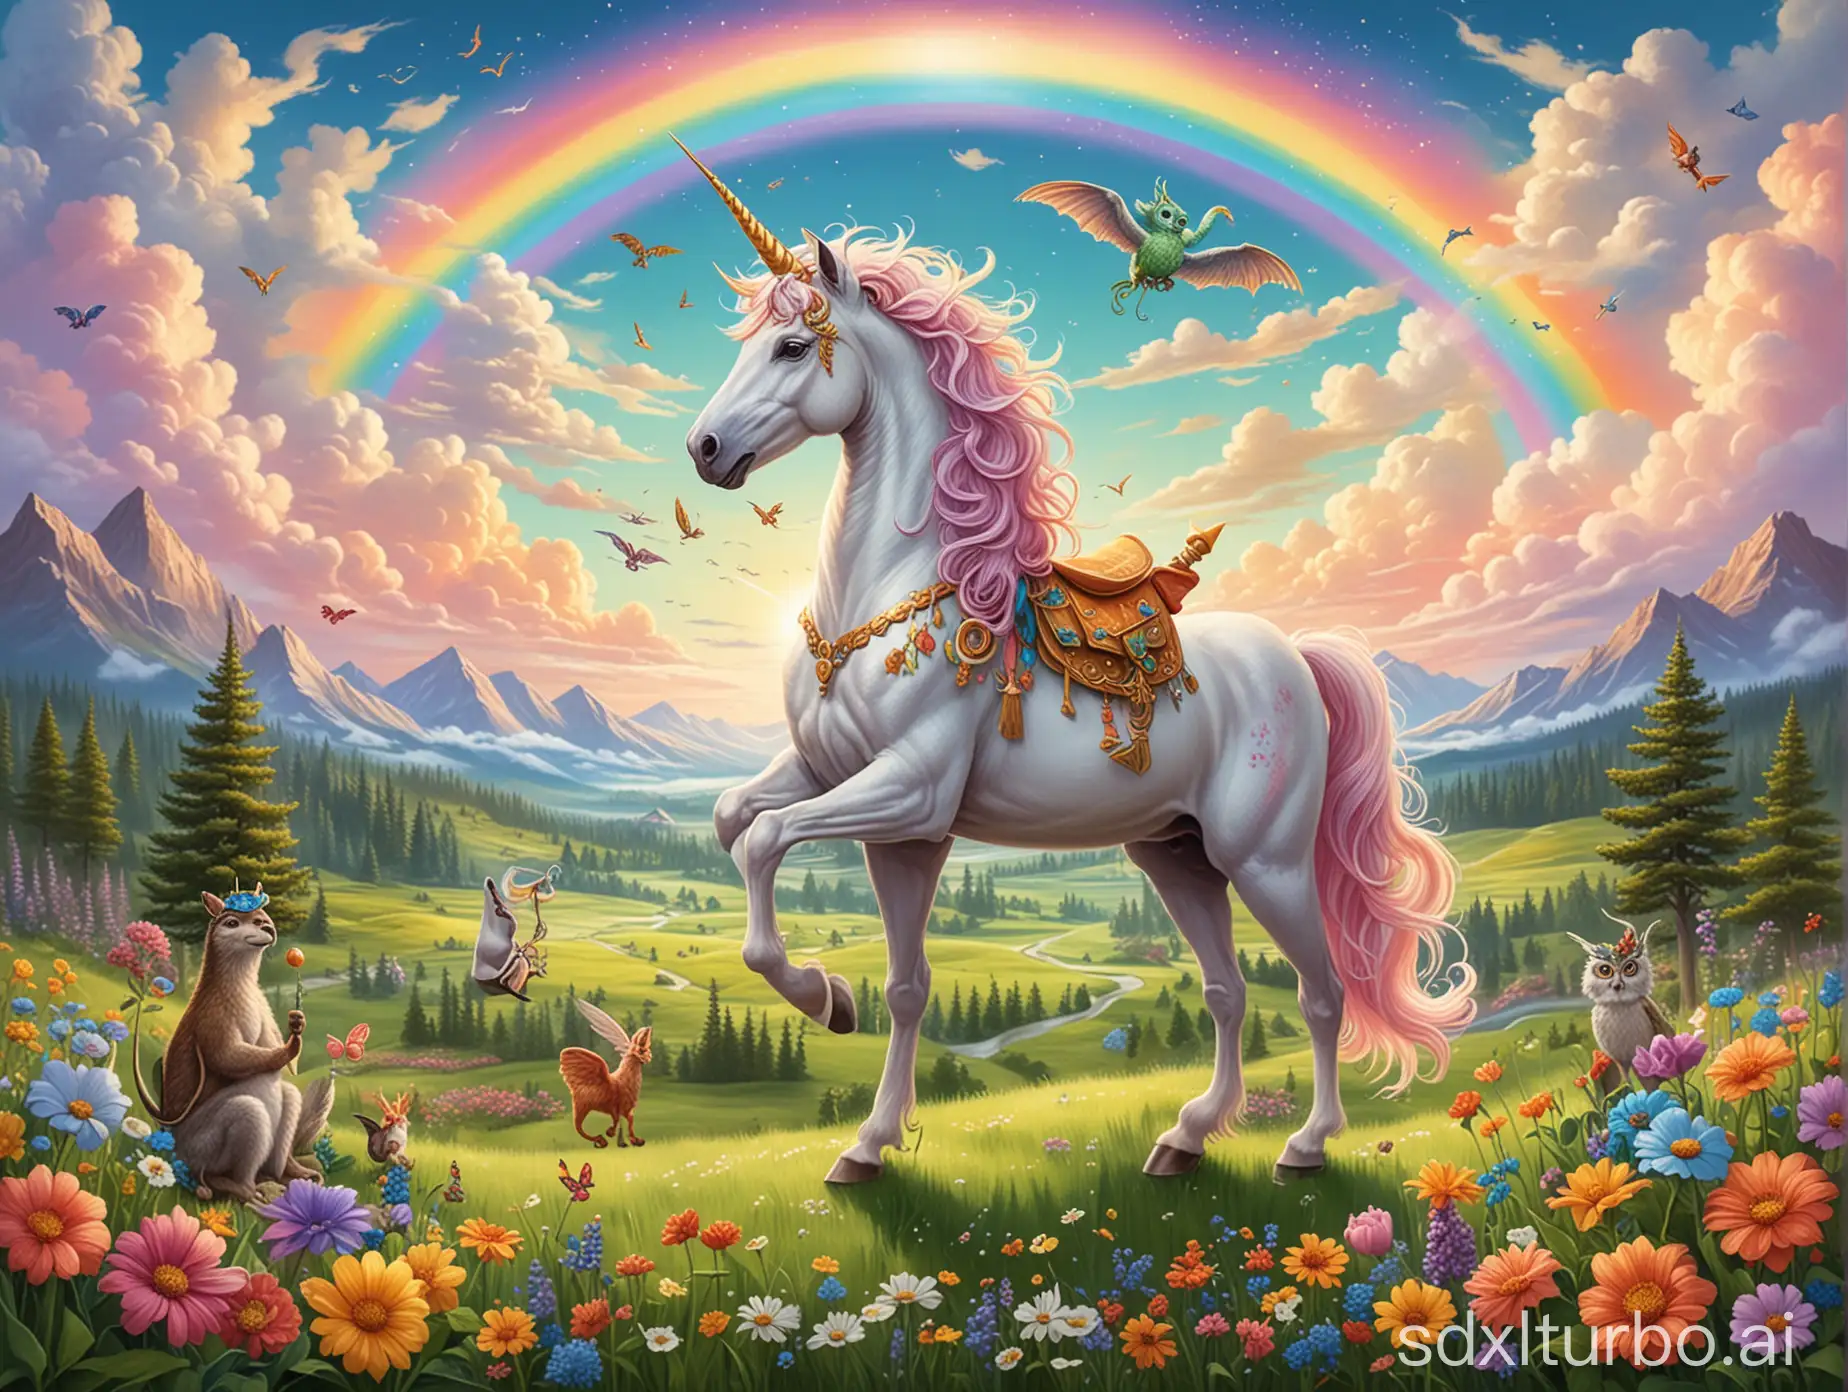 A vibrant and whimsical illustration featuring a diverse array of mythical creatures gathered together. A majestic unicorn with a sparkling horn stands in the center, surrounded by a mischievous leprechaun, a wise owl with a magical staff, and a playful dragon with a rainbow tail. The background is a soft pastel sky with fluffy clouds, and a lush green meadow with colorful flowers. This charming scene is perfect for a greeting card, evoking warmth and wonder.